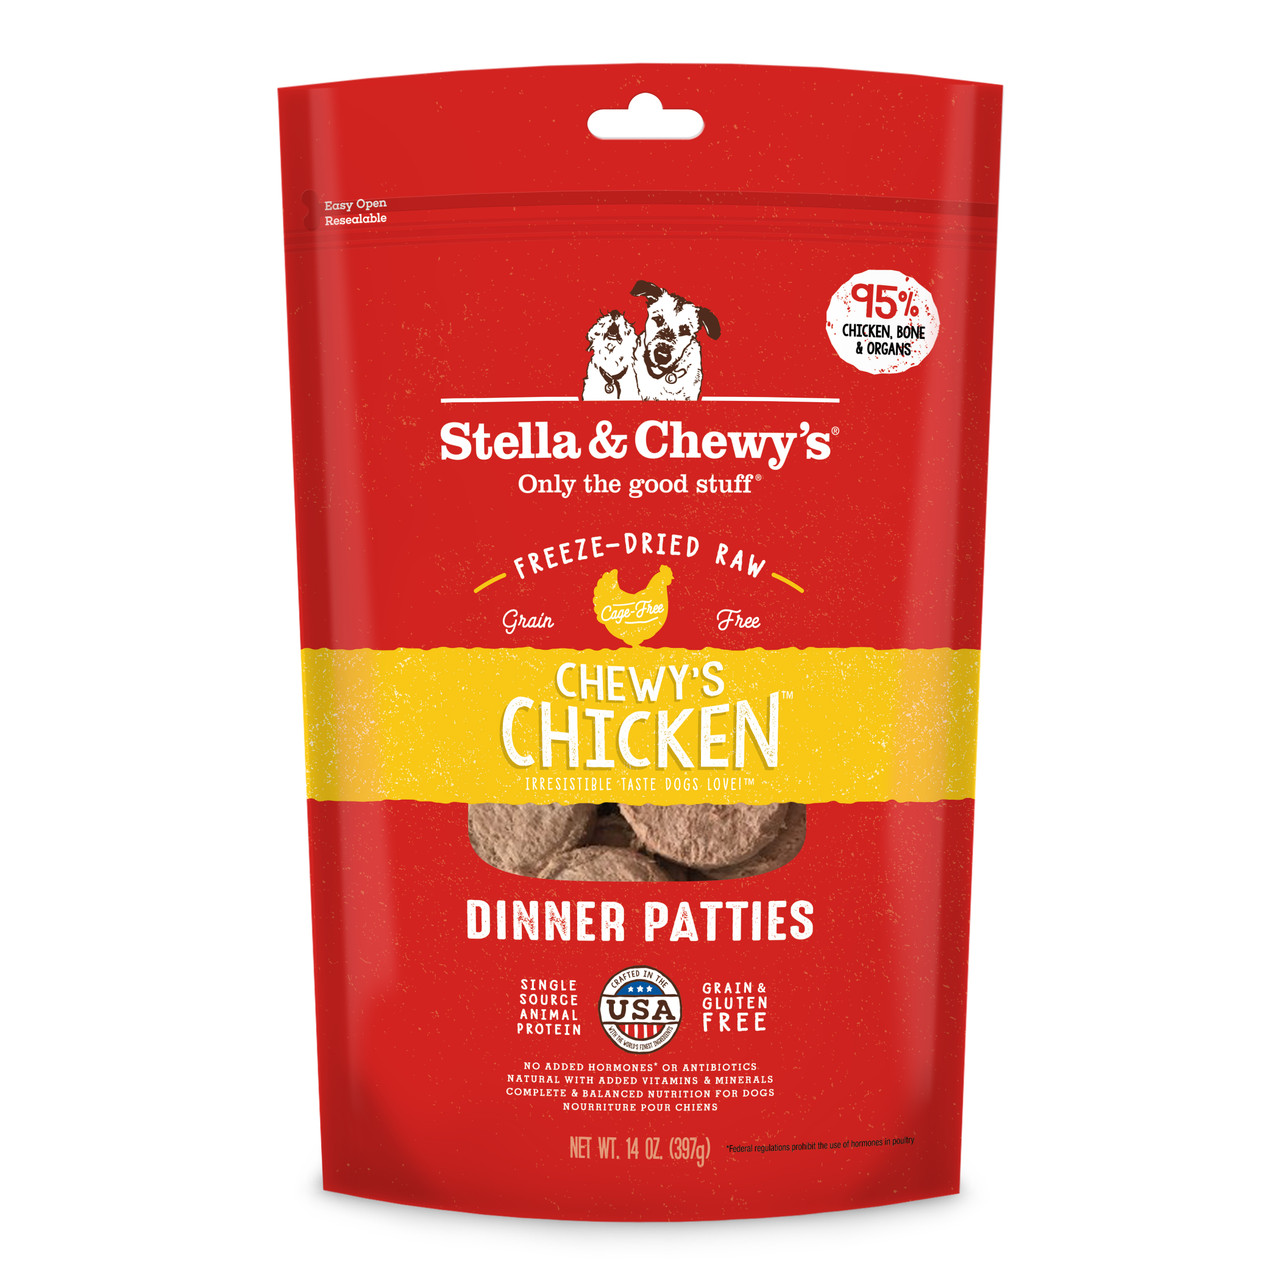 Stella and Chewys freeze dried raw dinner patties